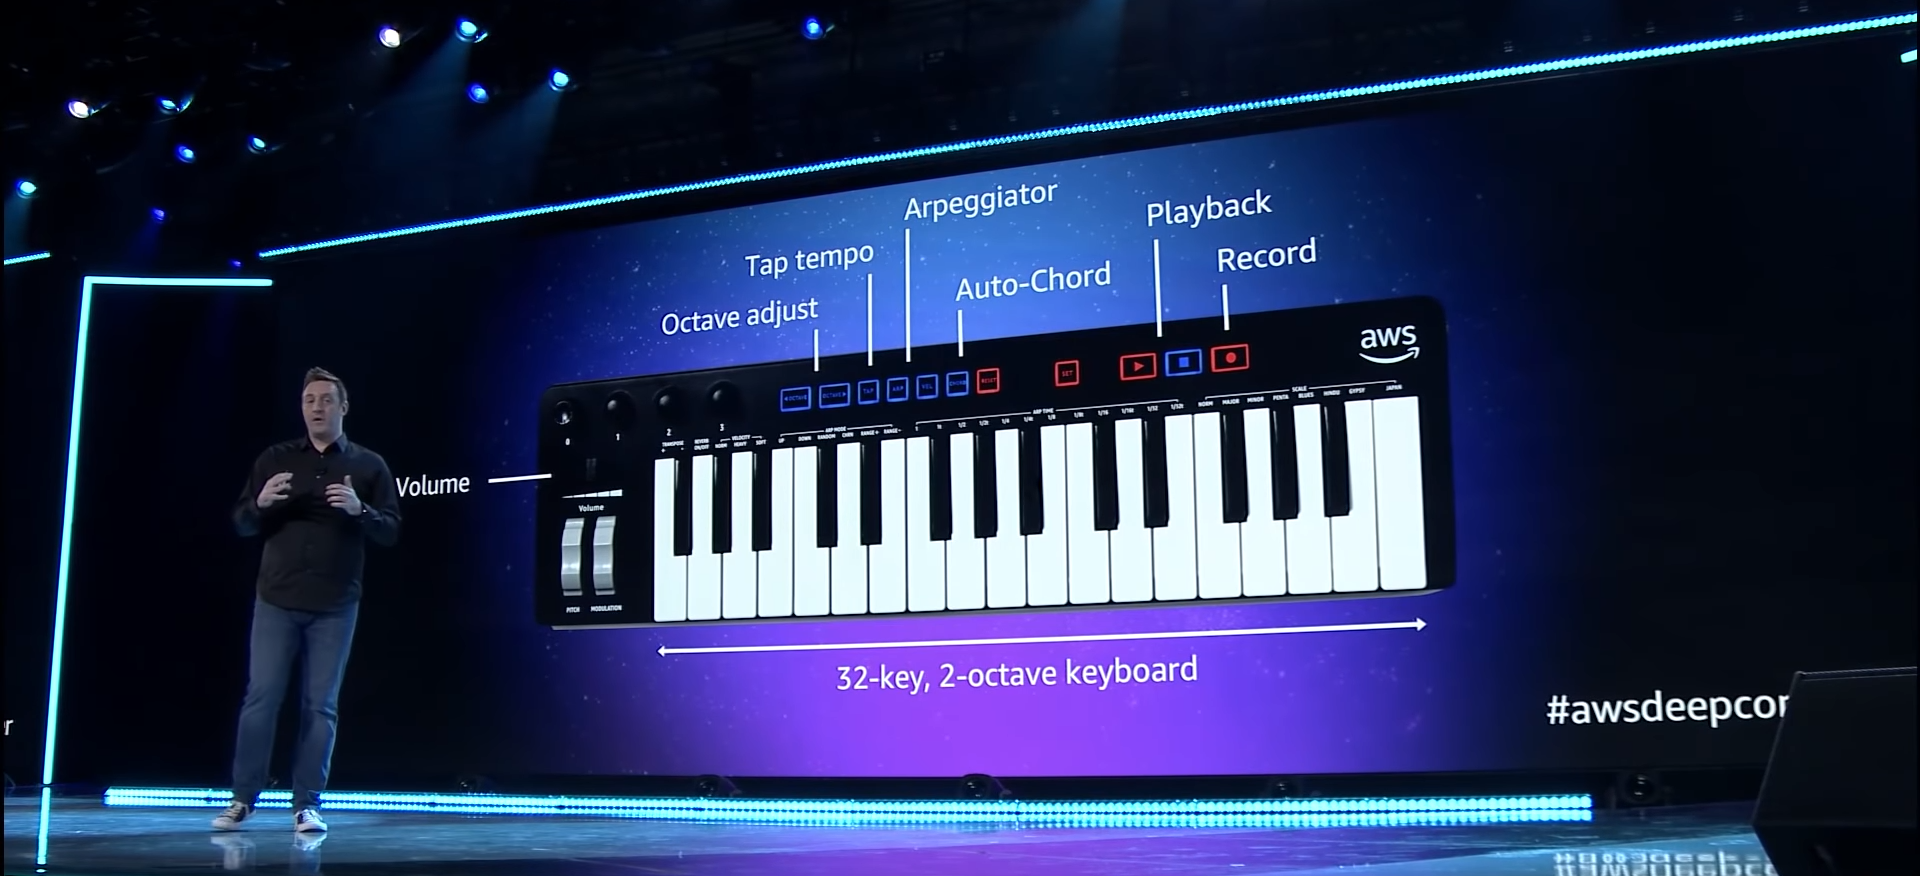 Amazon unveils the world’s first music keyboard powered by AI